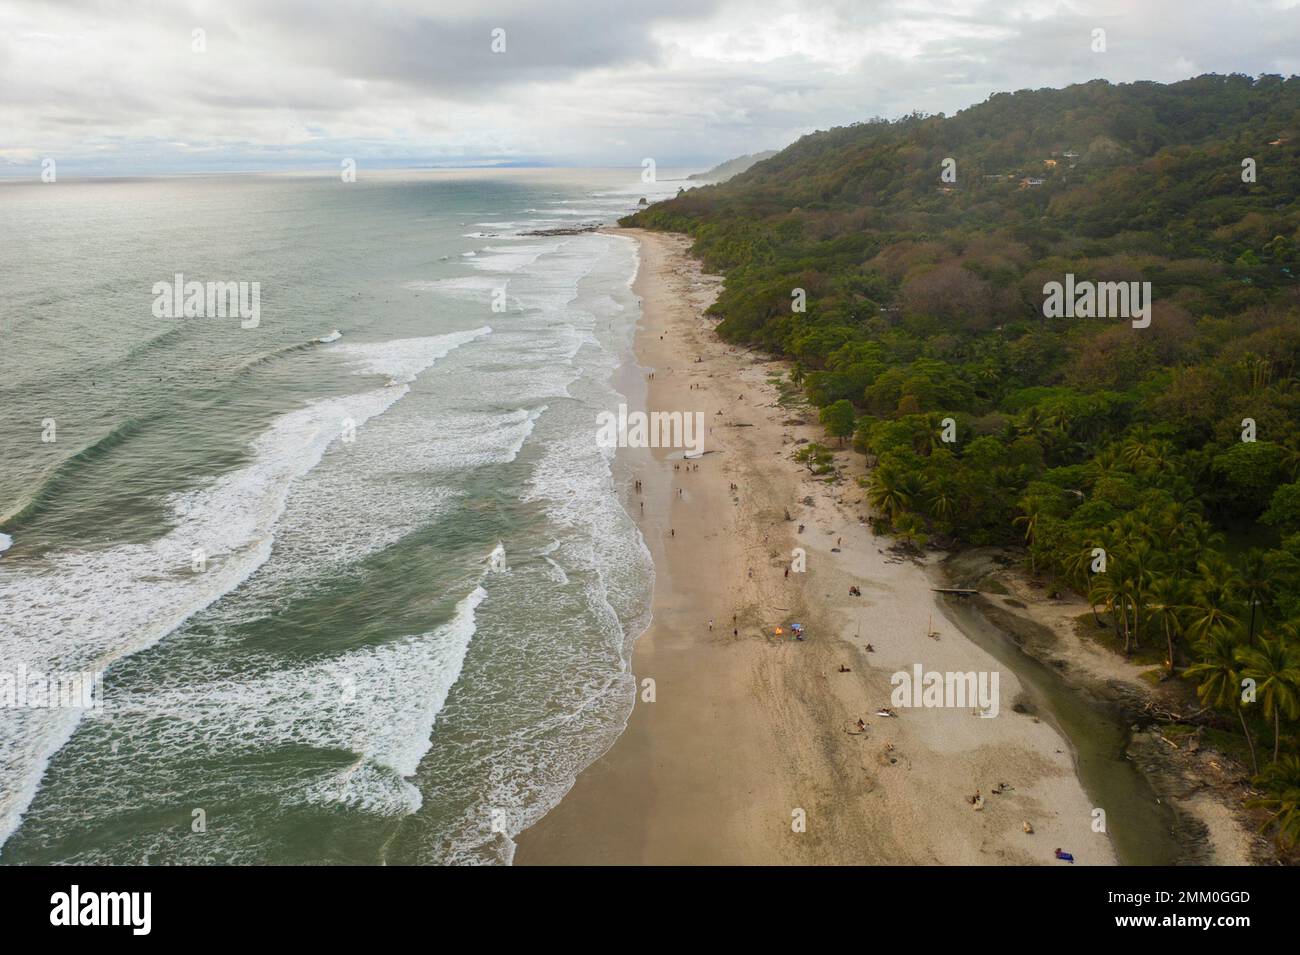 Drone photography of the coast at Santa Teresa a small town in Puntarenas Province, Costa Rica. Santa Teresa started as a remote fishing village, rely Stock Photo